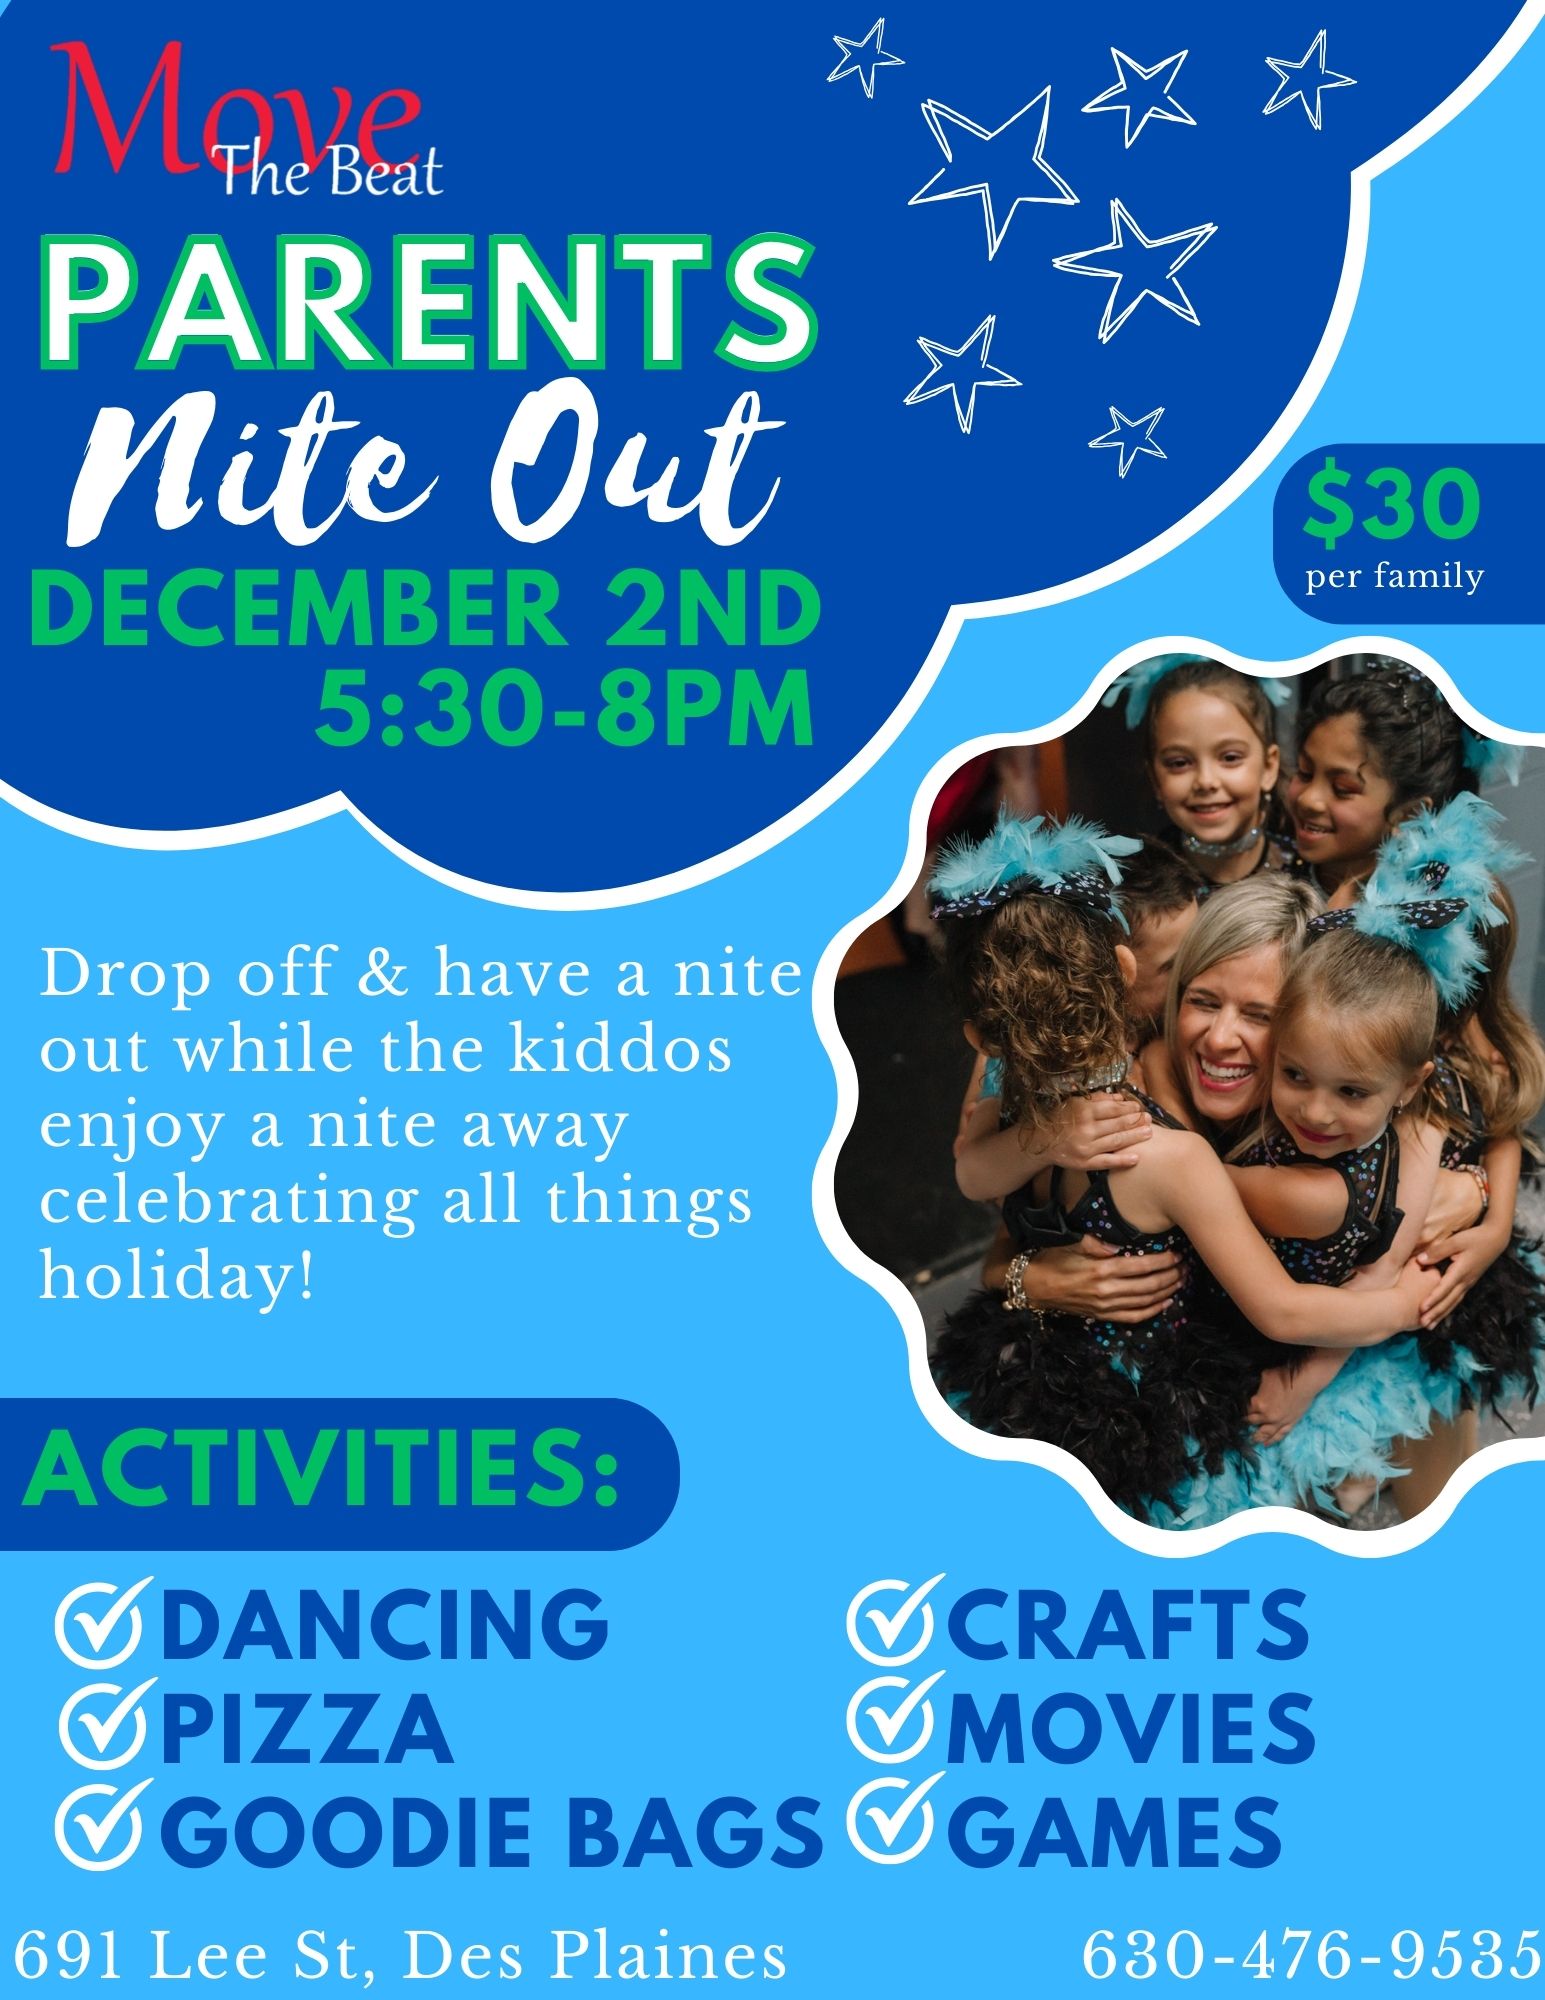 Parents' Nite Out - Move the Beat